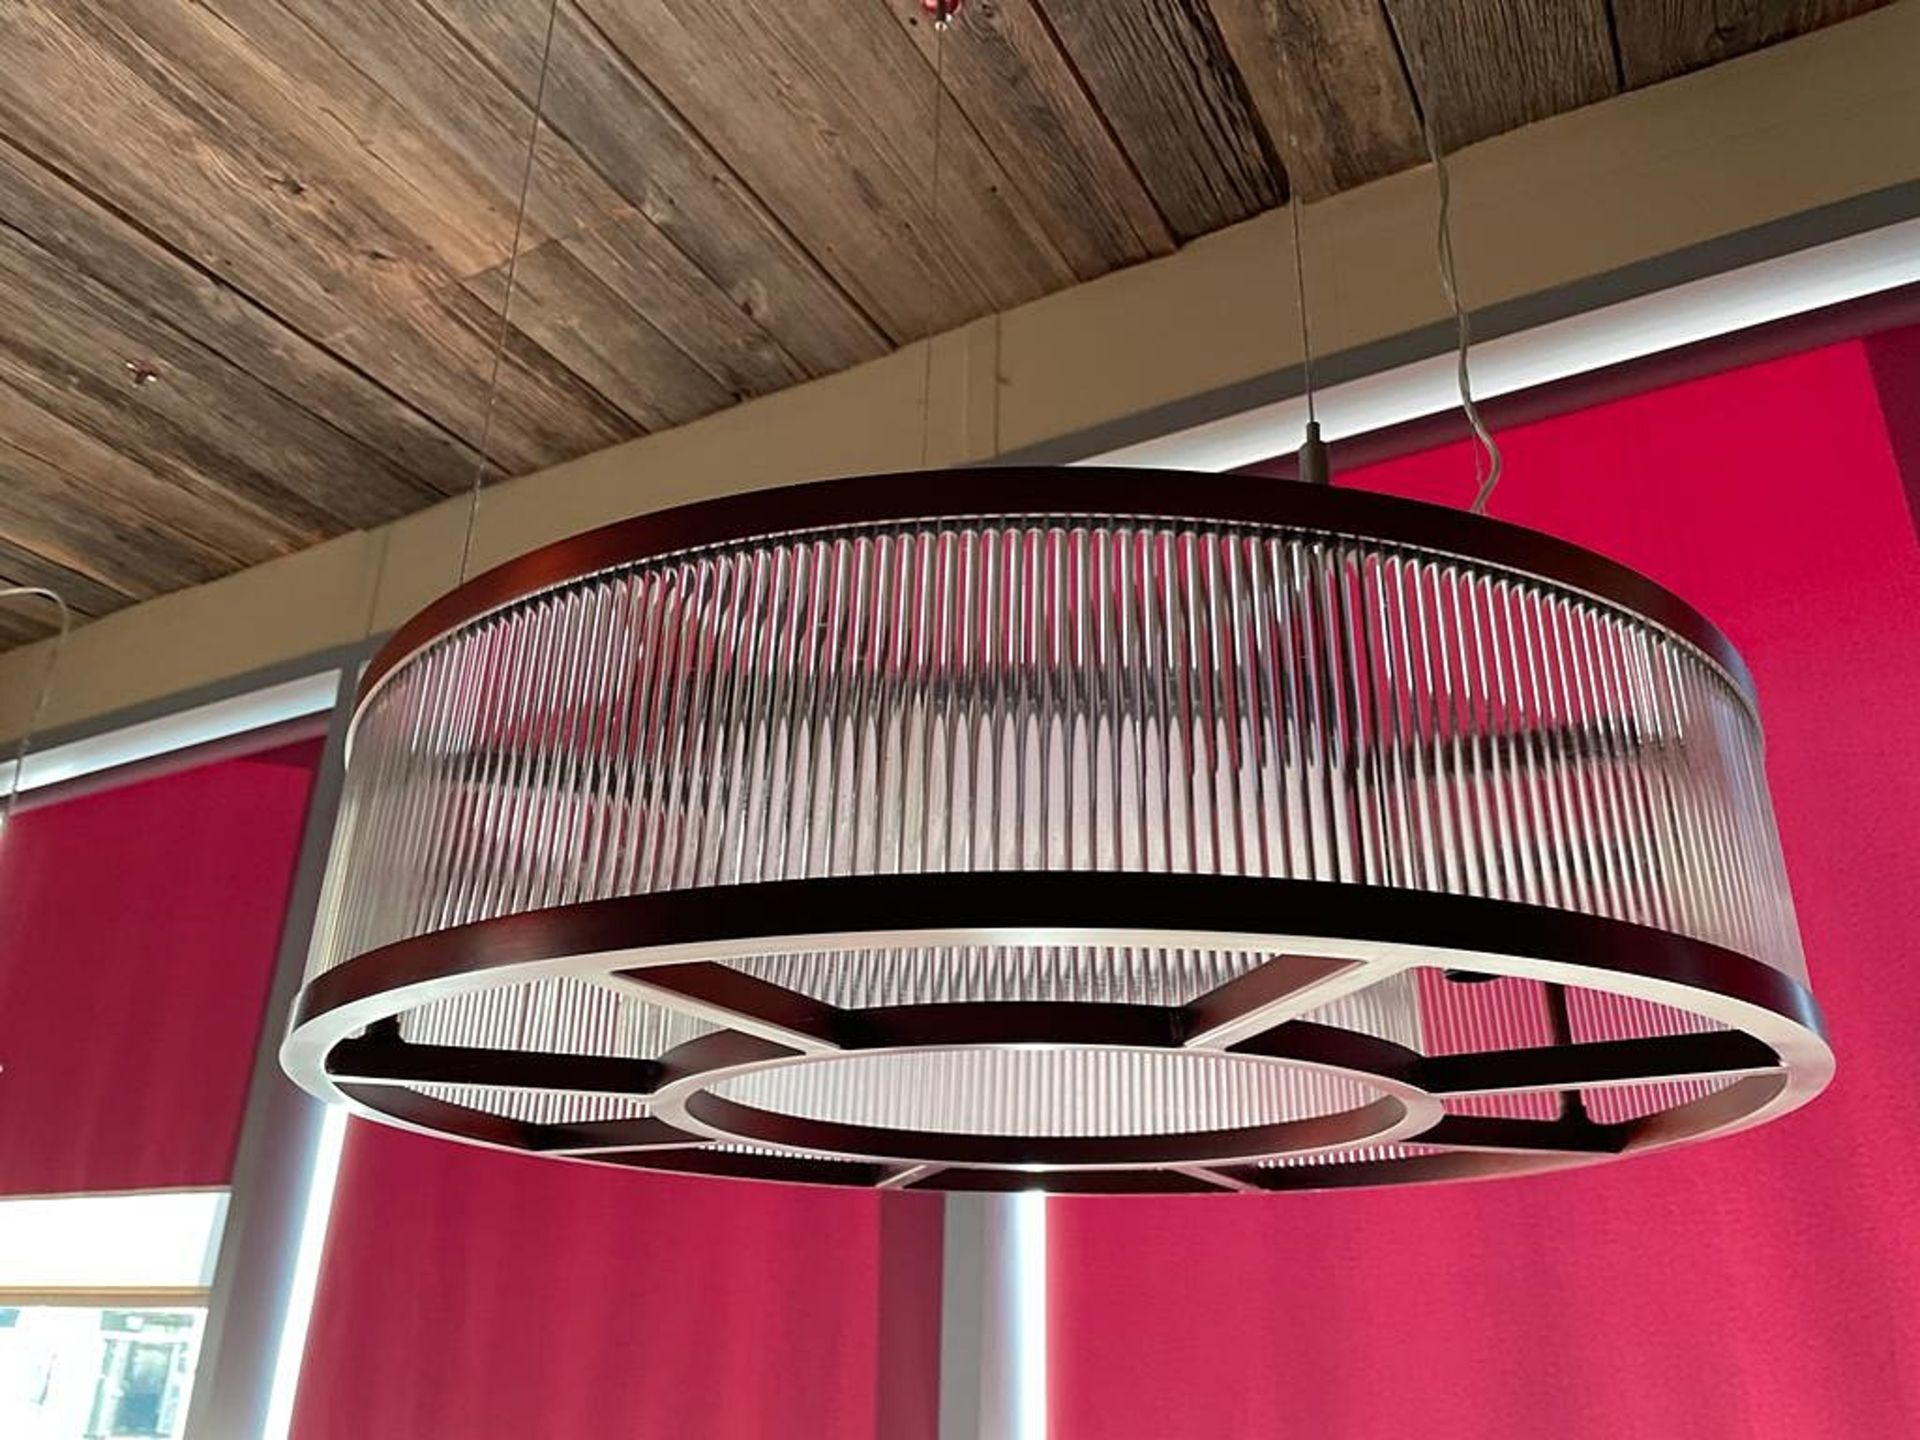 1 x Large Commercial Circular Art Deco-Style Suspended Light Fitting - Features A Copper Finish - Image 2 of 4